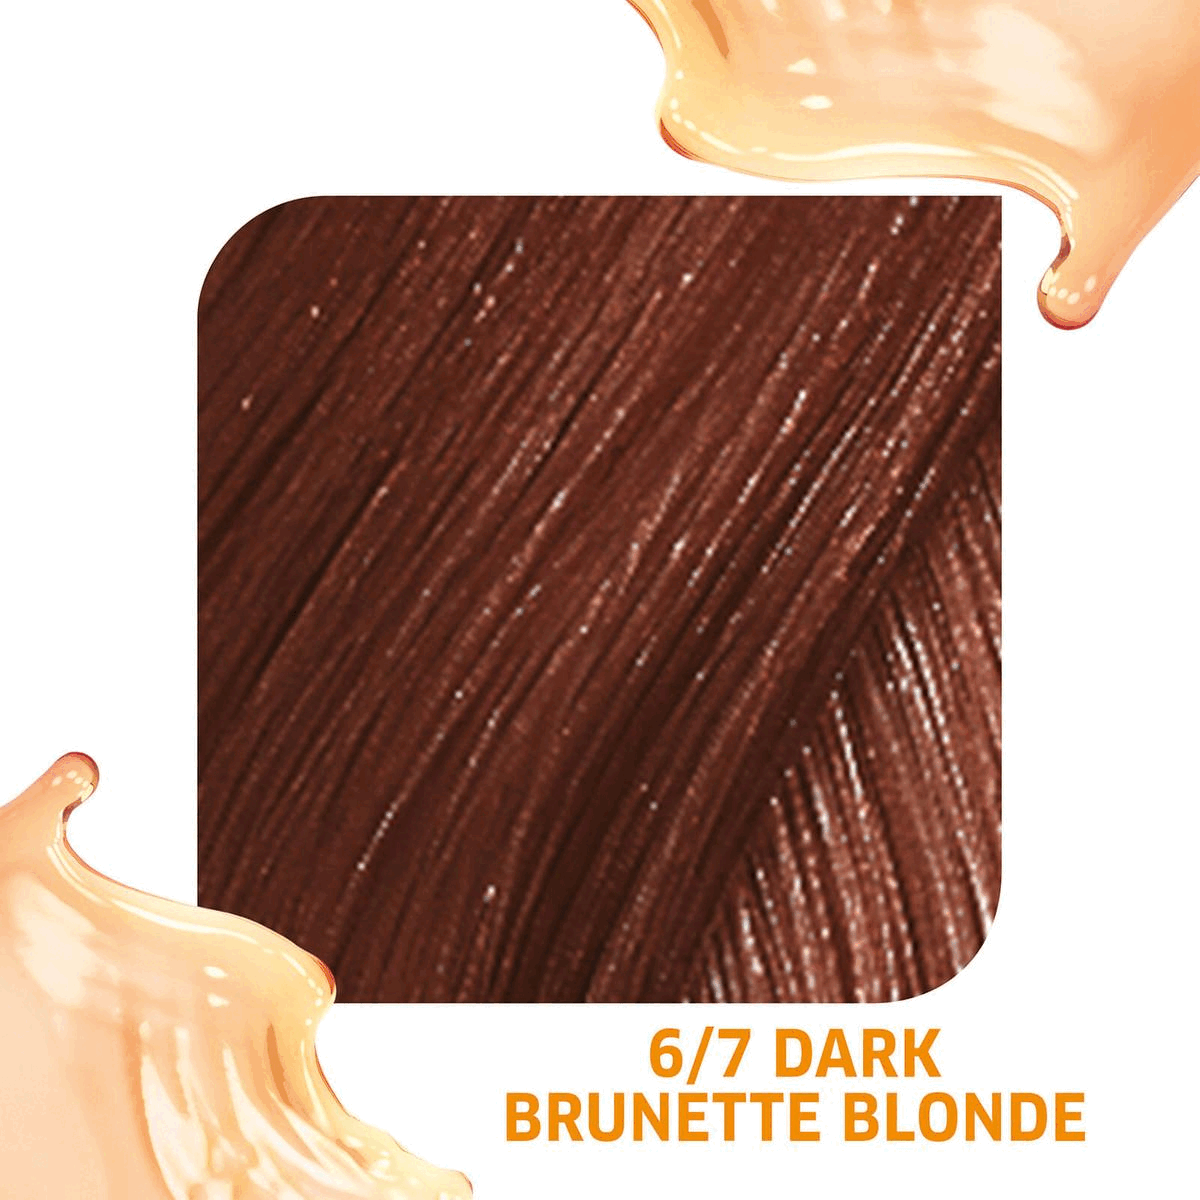 6/7 Dark Brunette Blonde  Semi-Permenant Colour enhance. Direct Dies and Vitamin Care Complex. Lasts Up to 10 Shampoos. Colour, depth and tone. Quick and Easy Application  